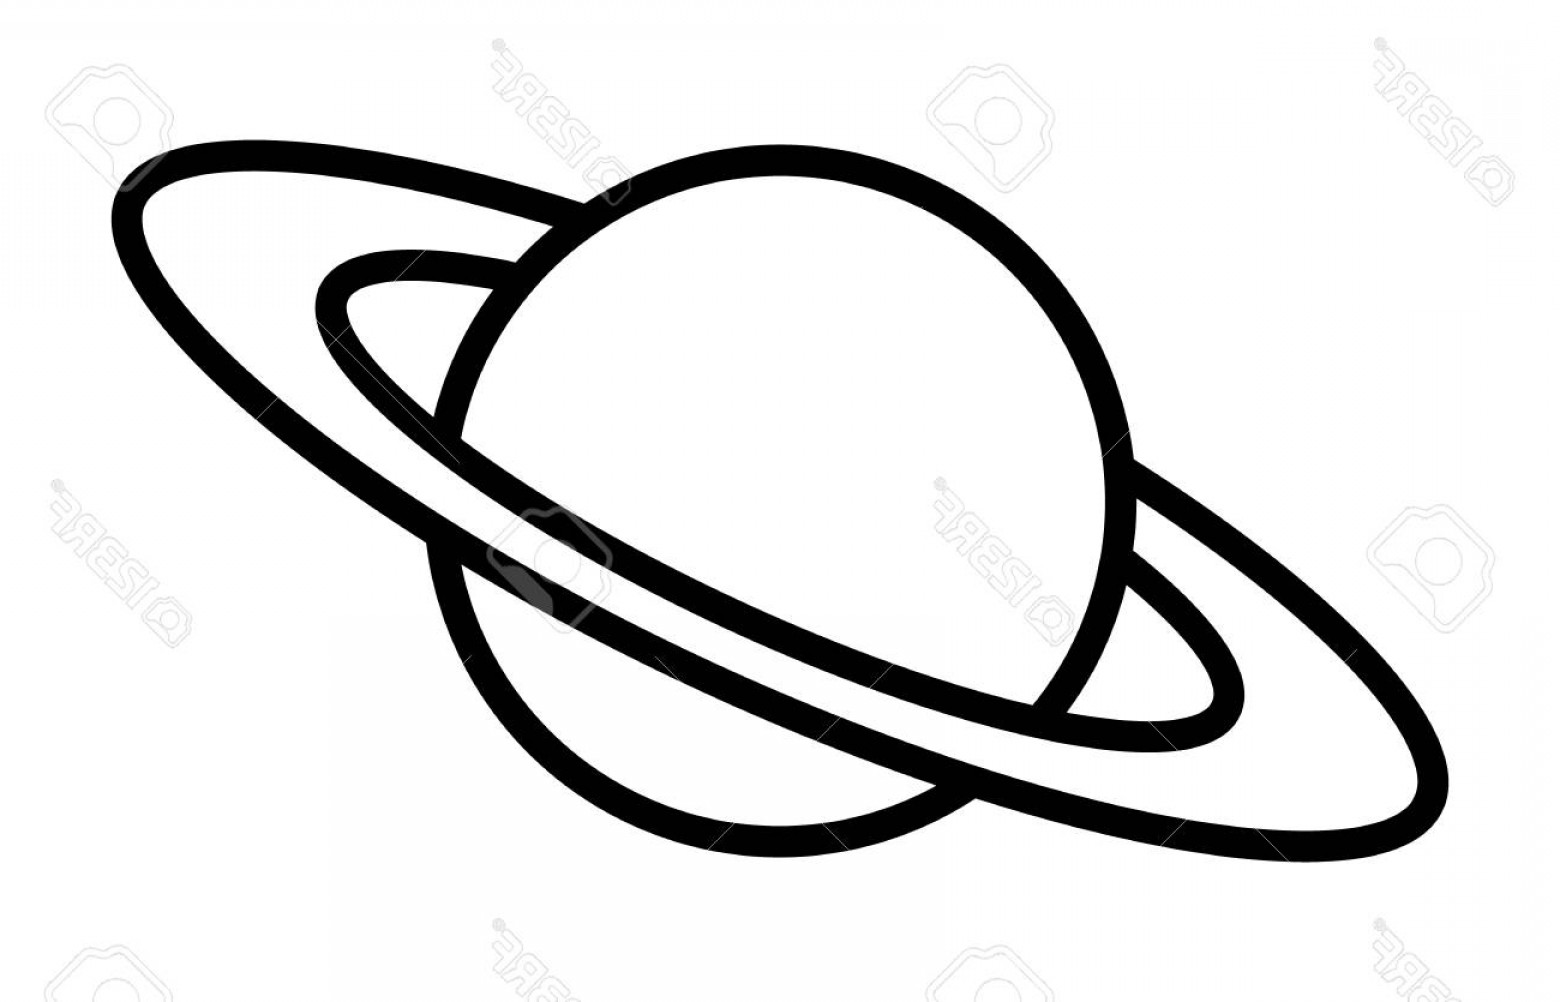 Saturn planet drawing.